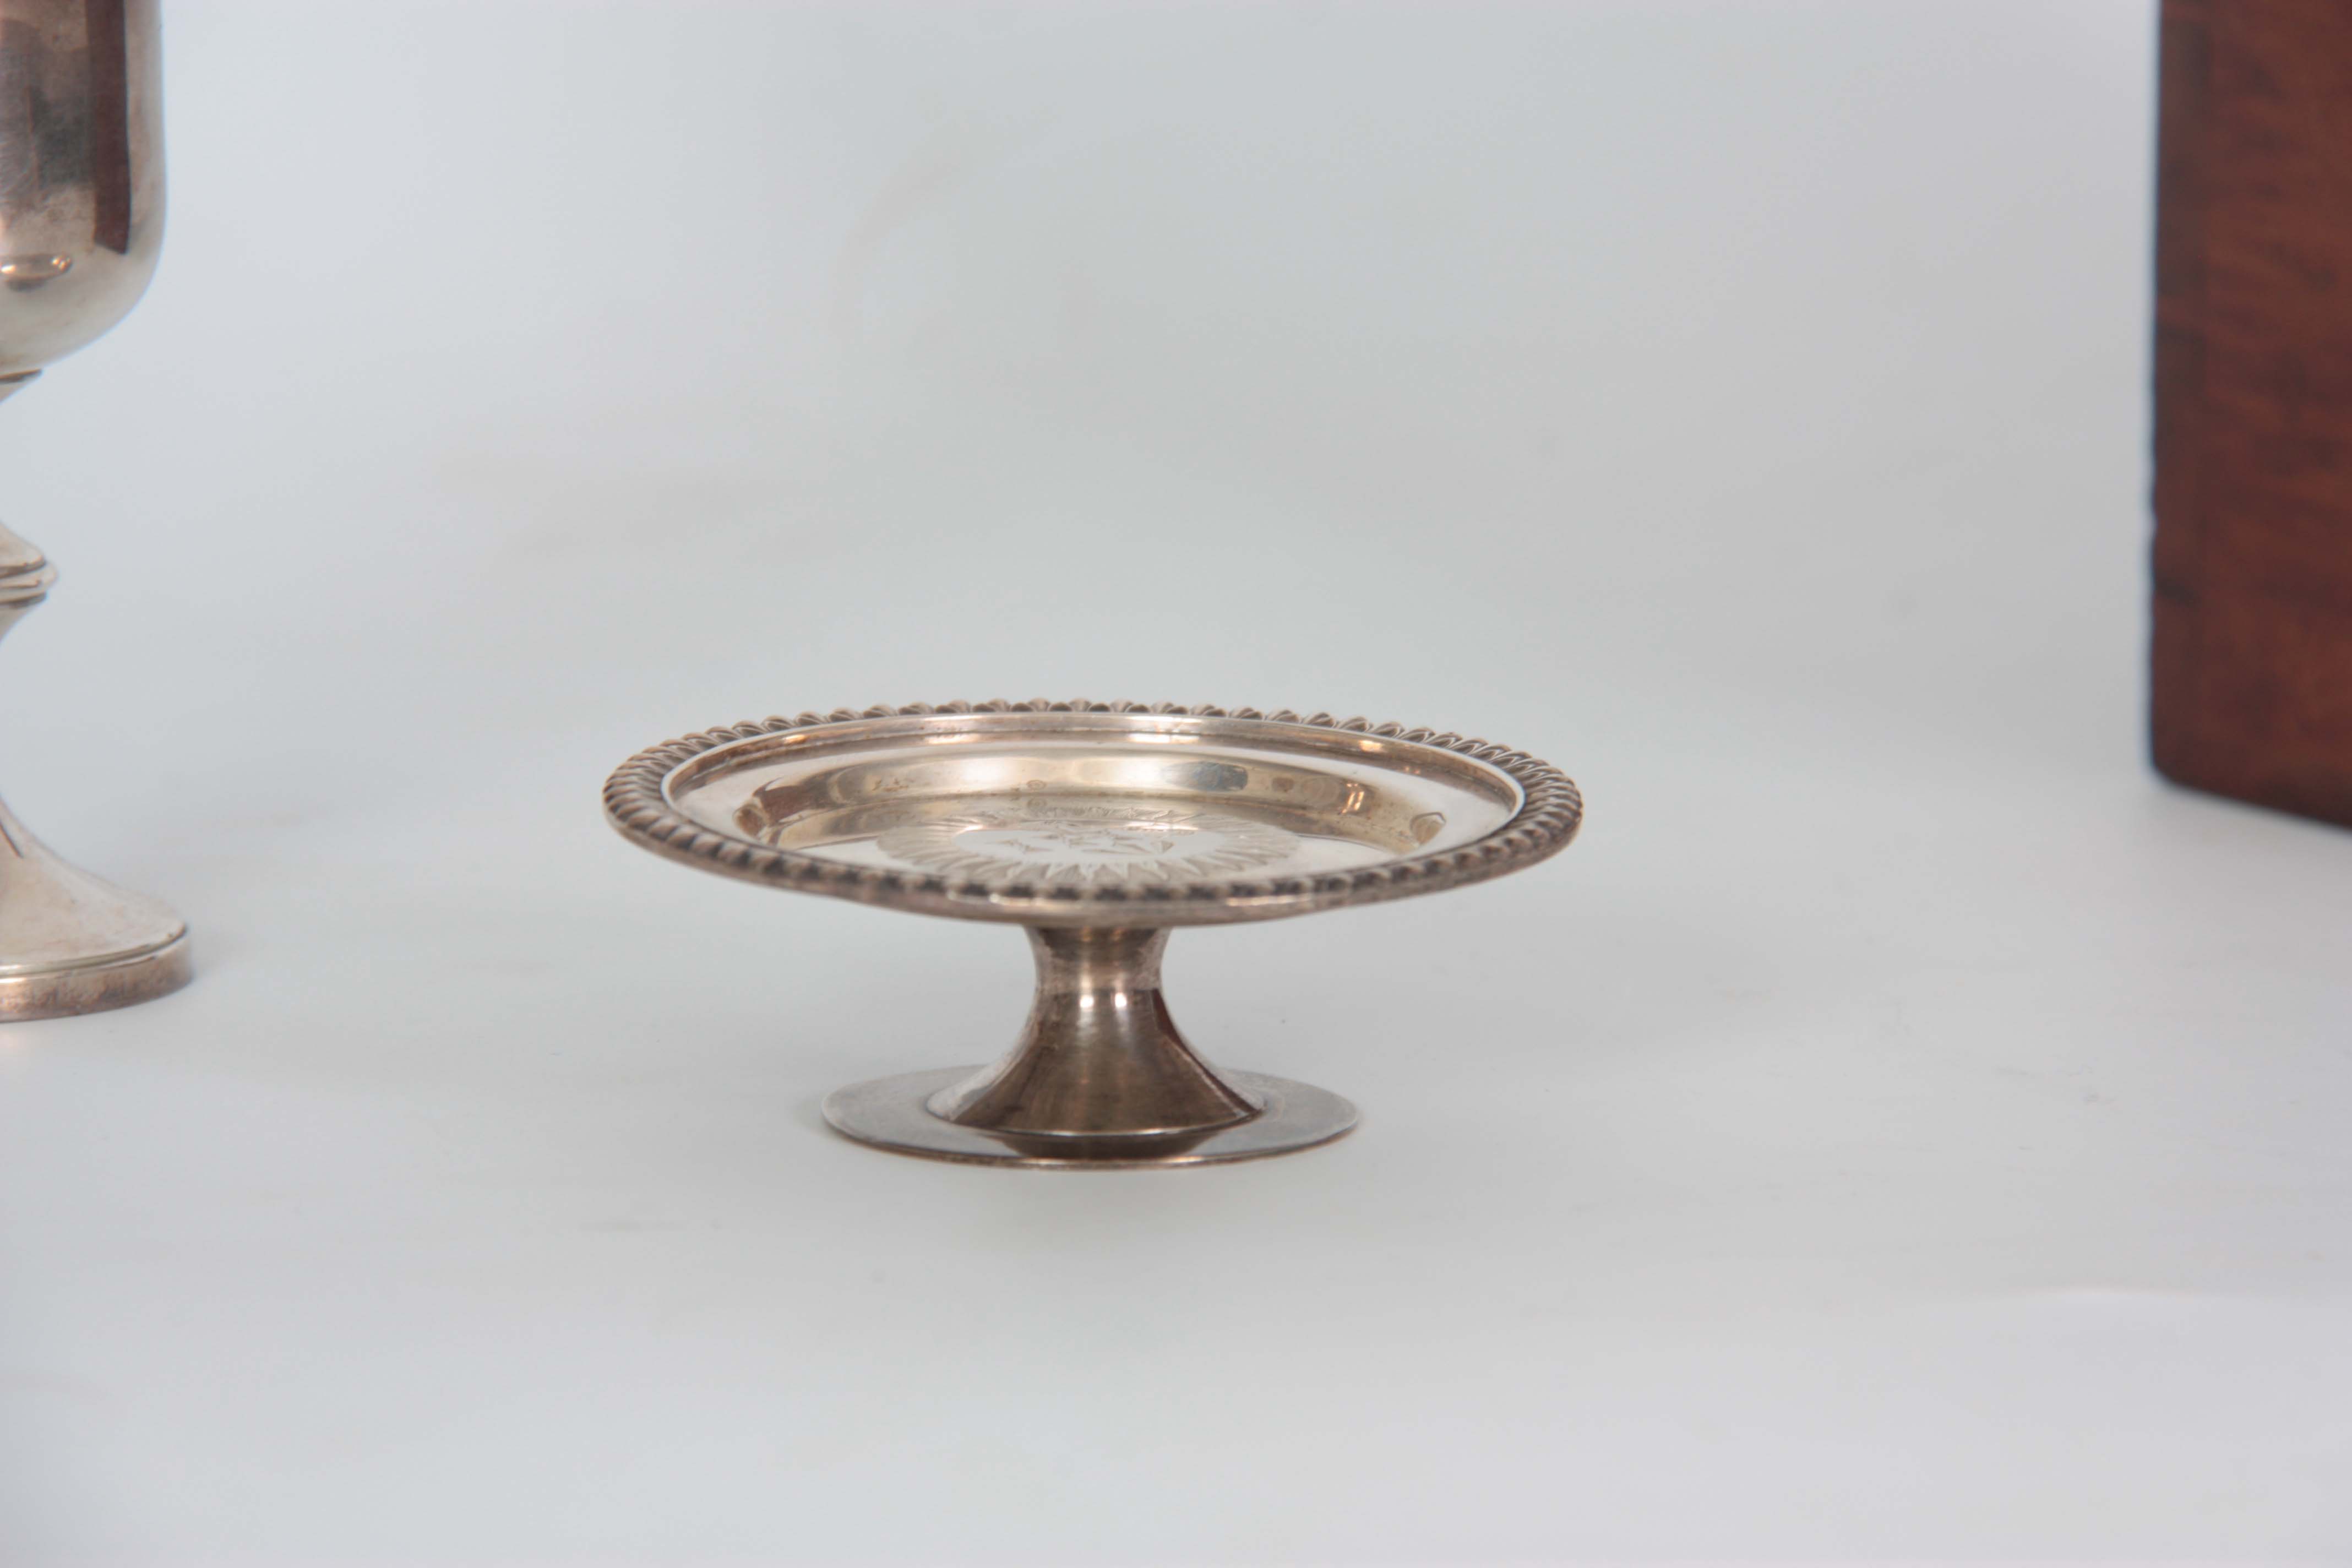 A GEORGE IV SILVER COMMUNION SET IN ORIGINAL MAHOGANY BOX comprising chalice and paten both with - Image 6 of 7